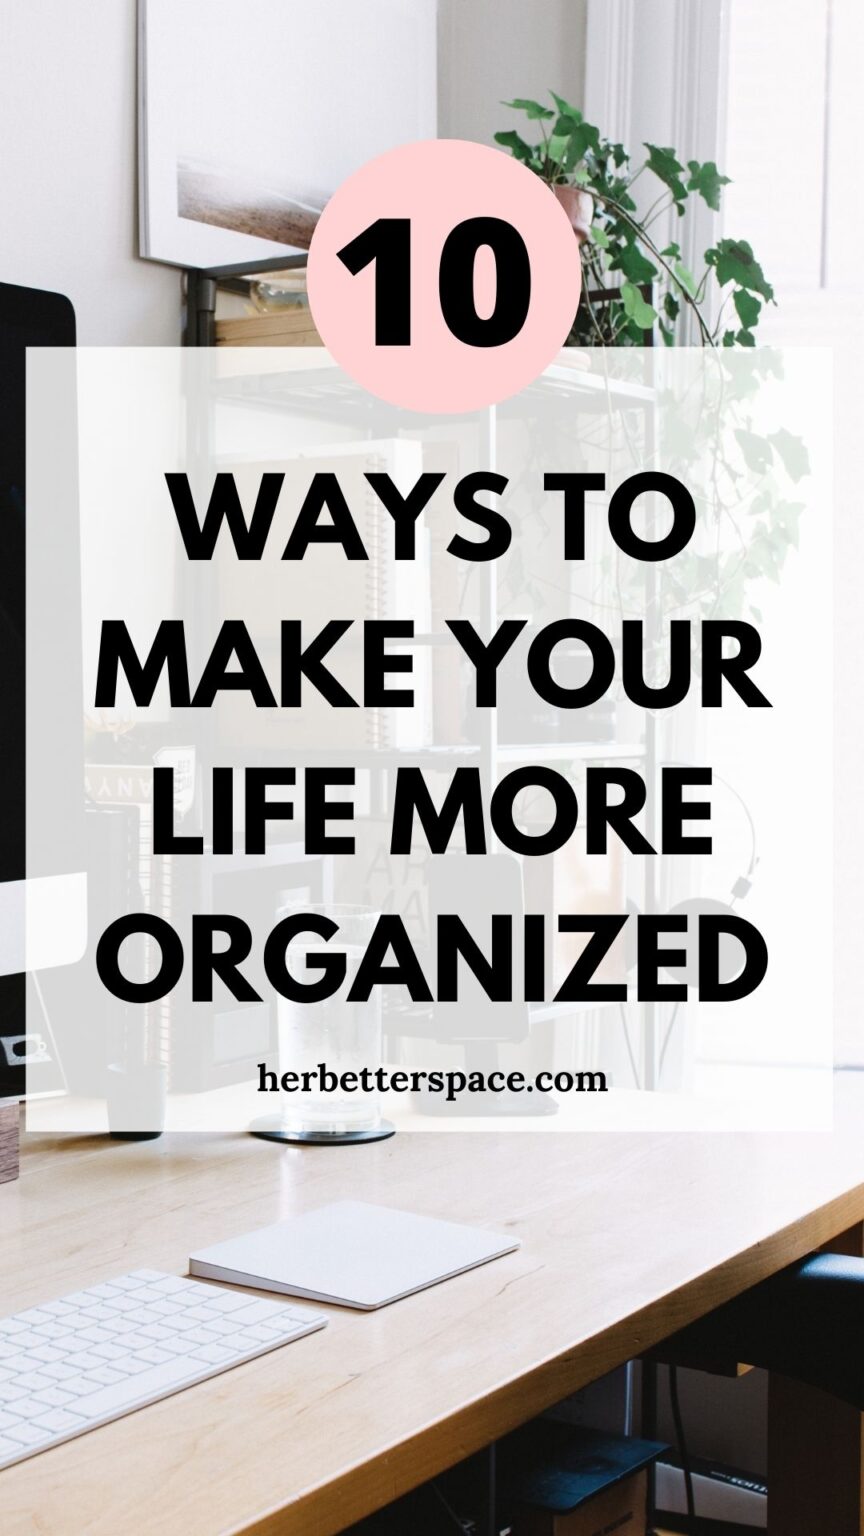 How To Make Your Life More Organized - Her Better Space